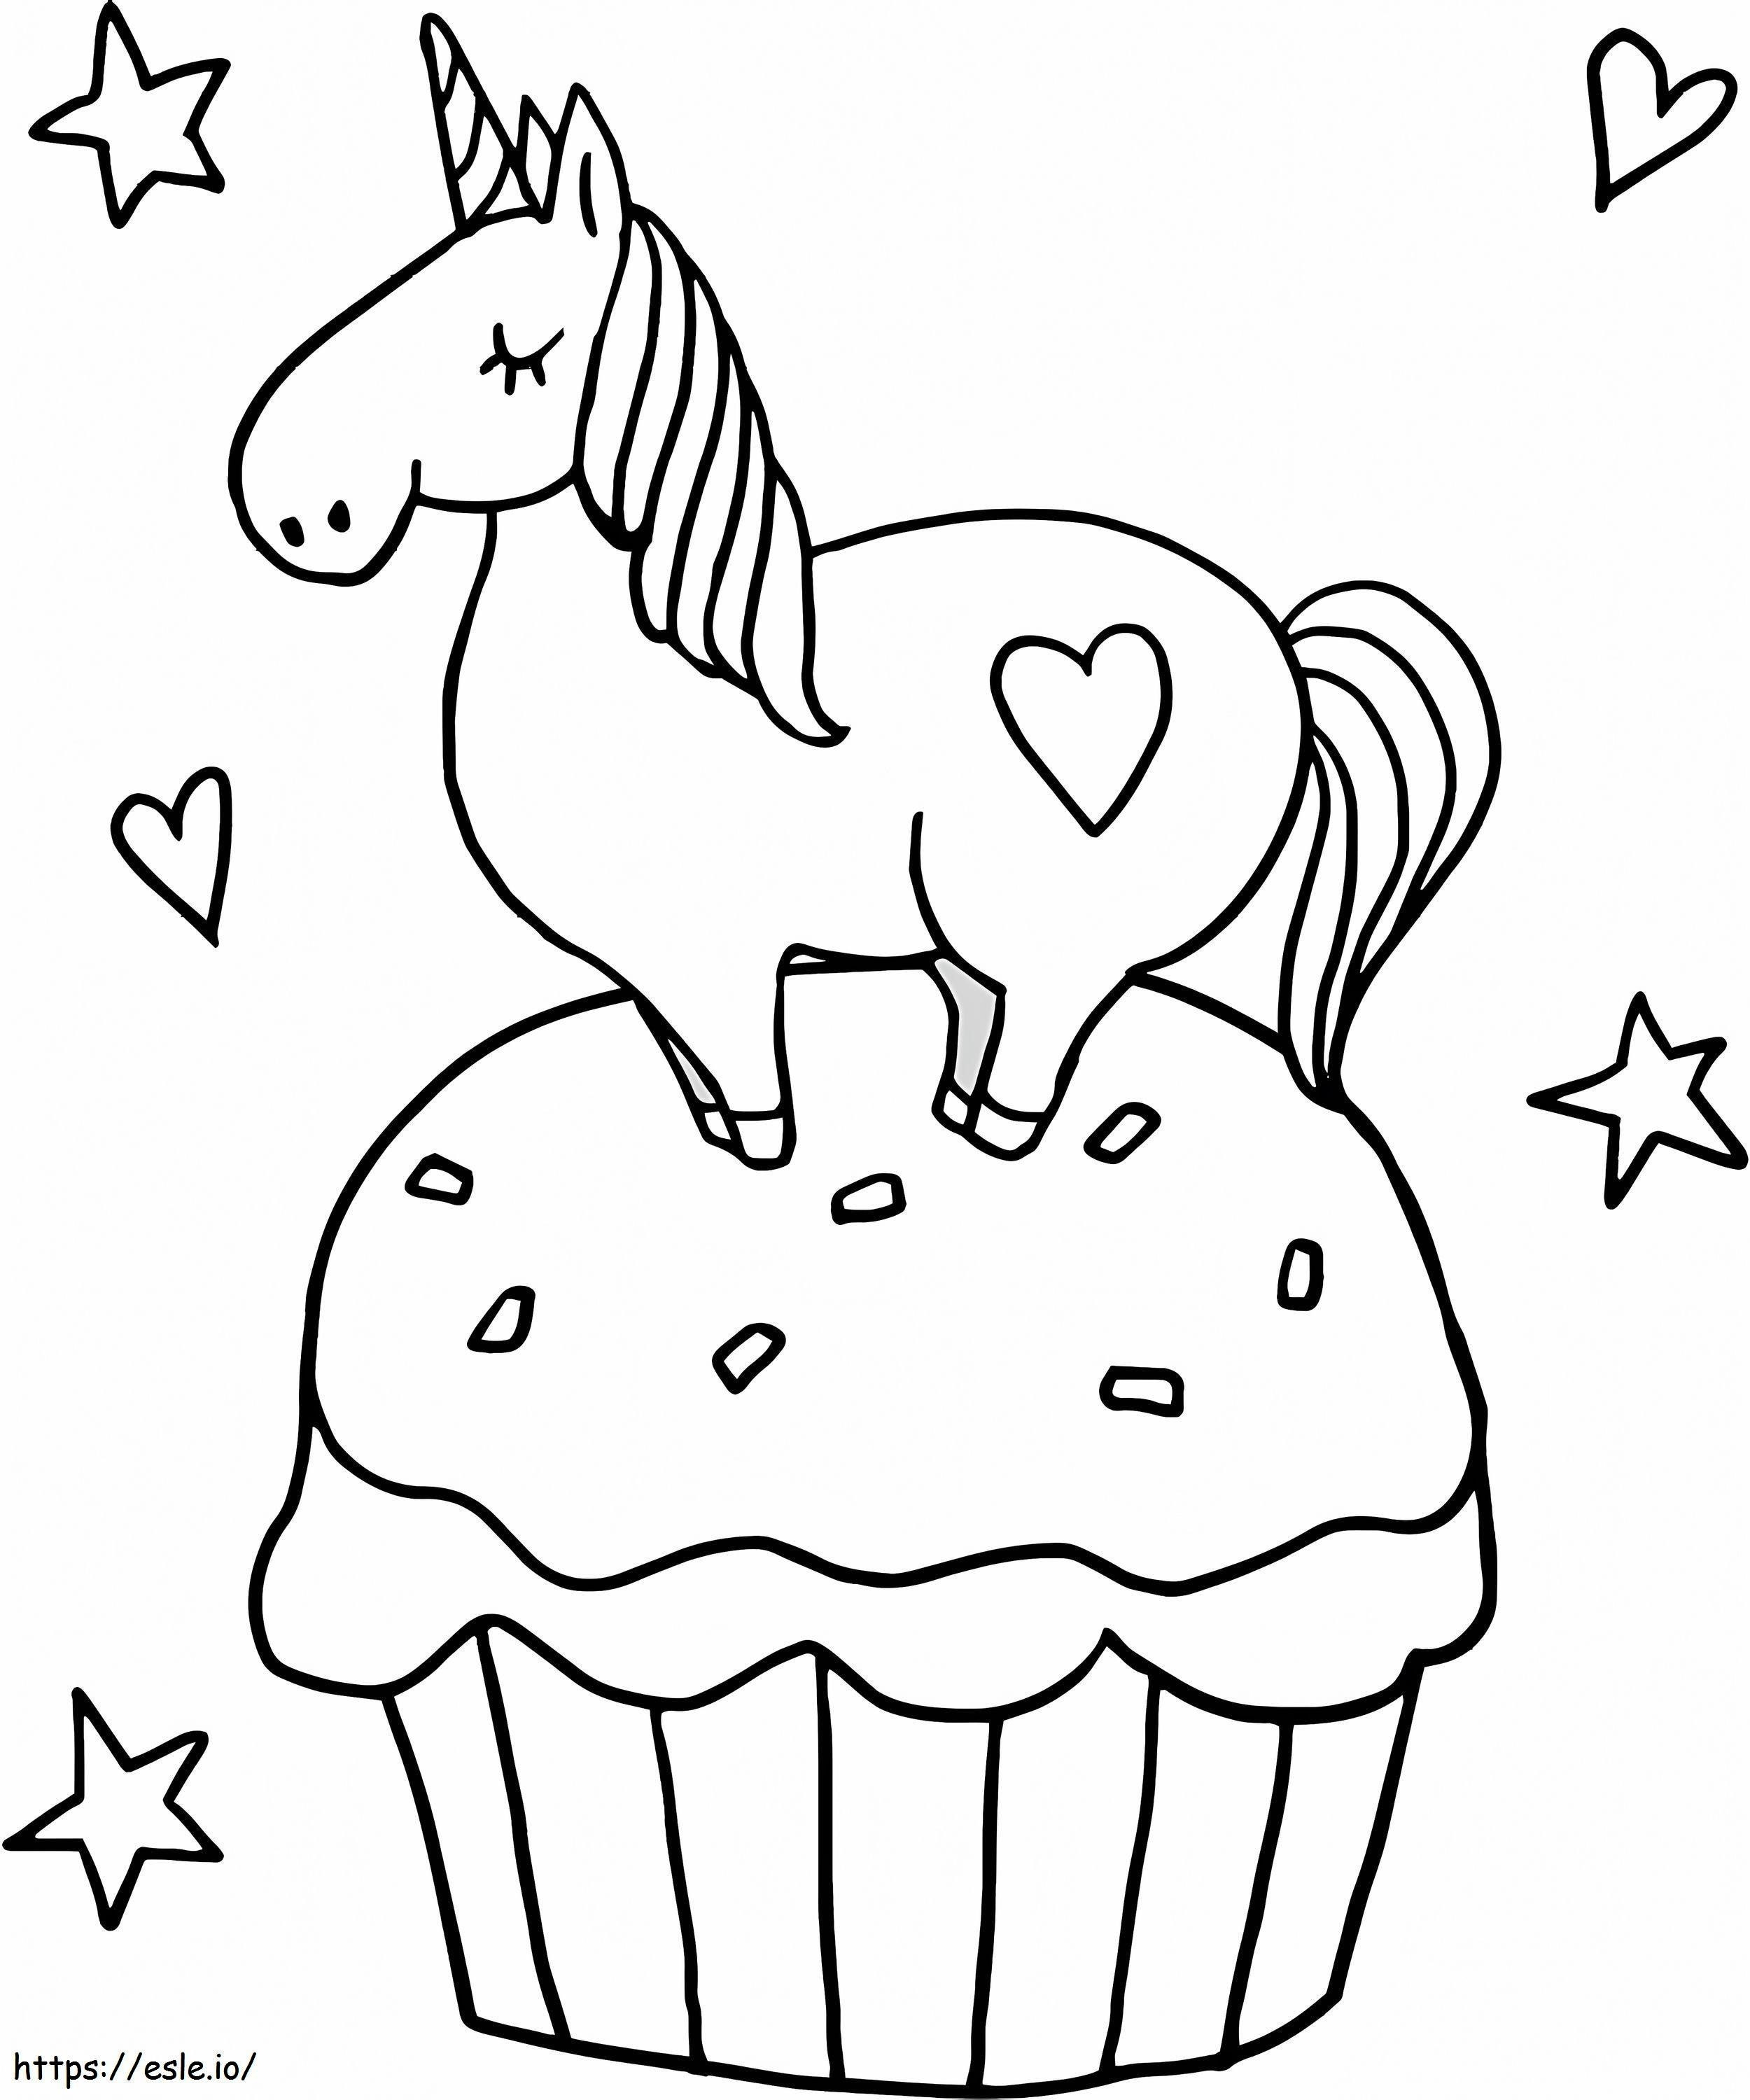 1563326262 Little Unicorn On Cupcake A4 coloring page